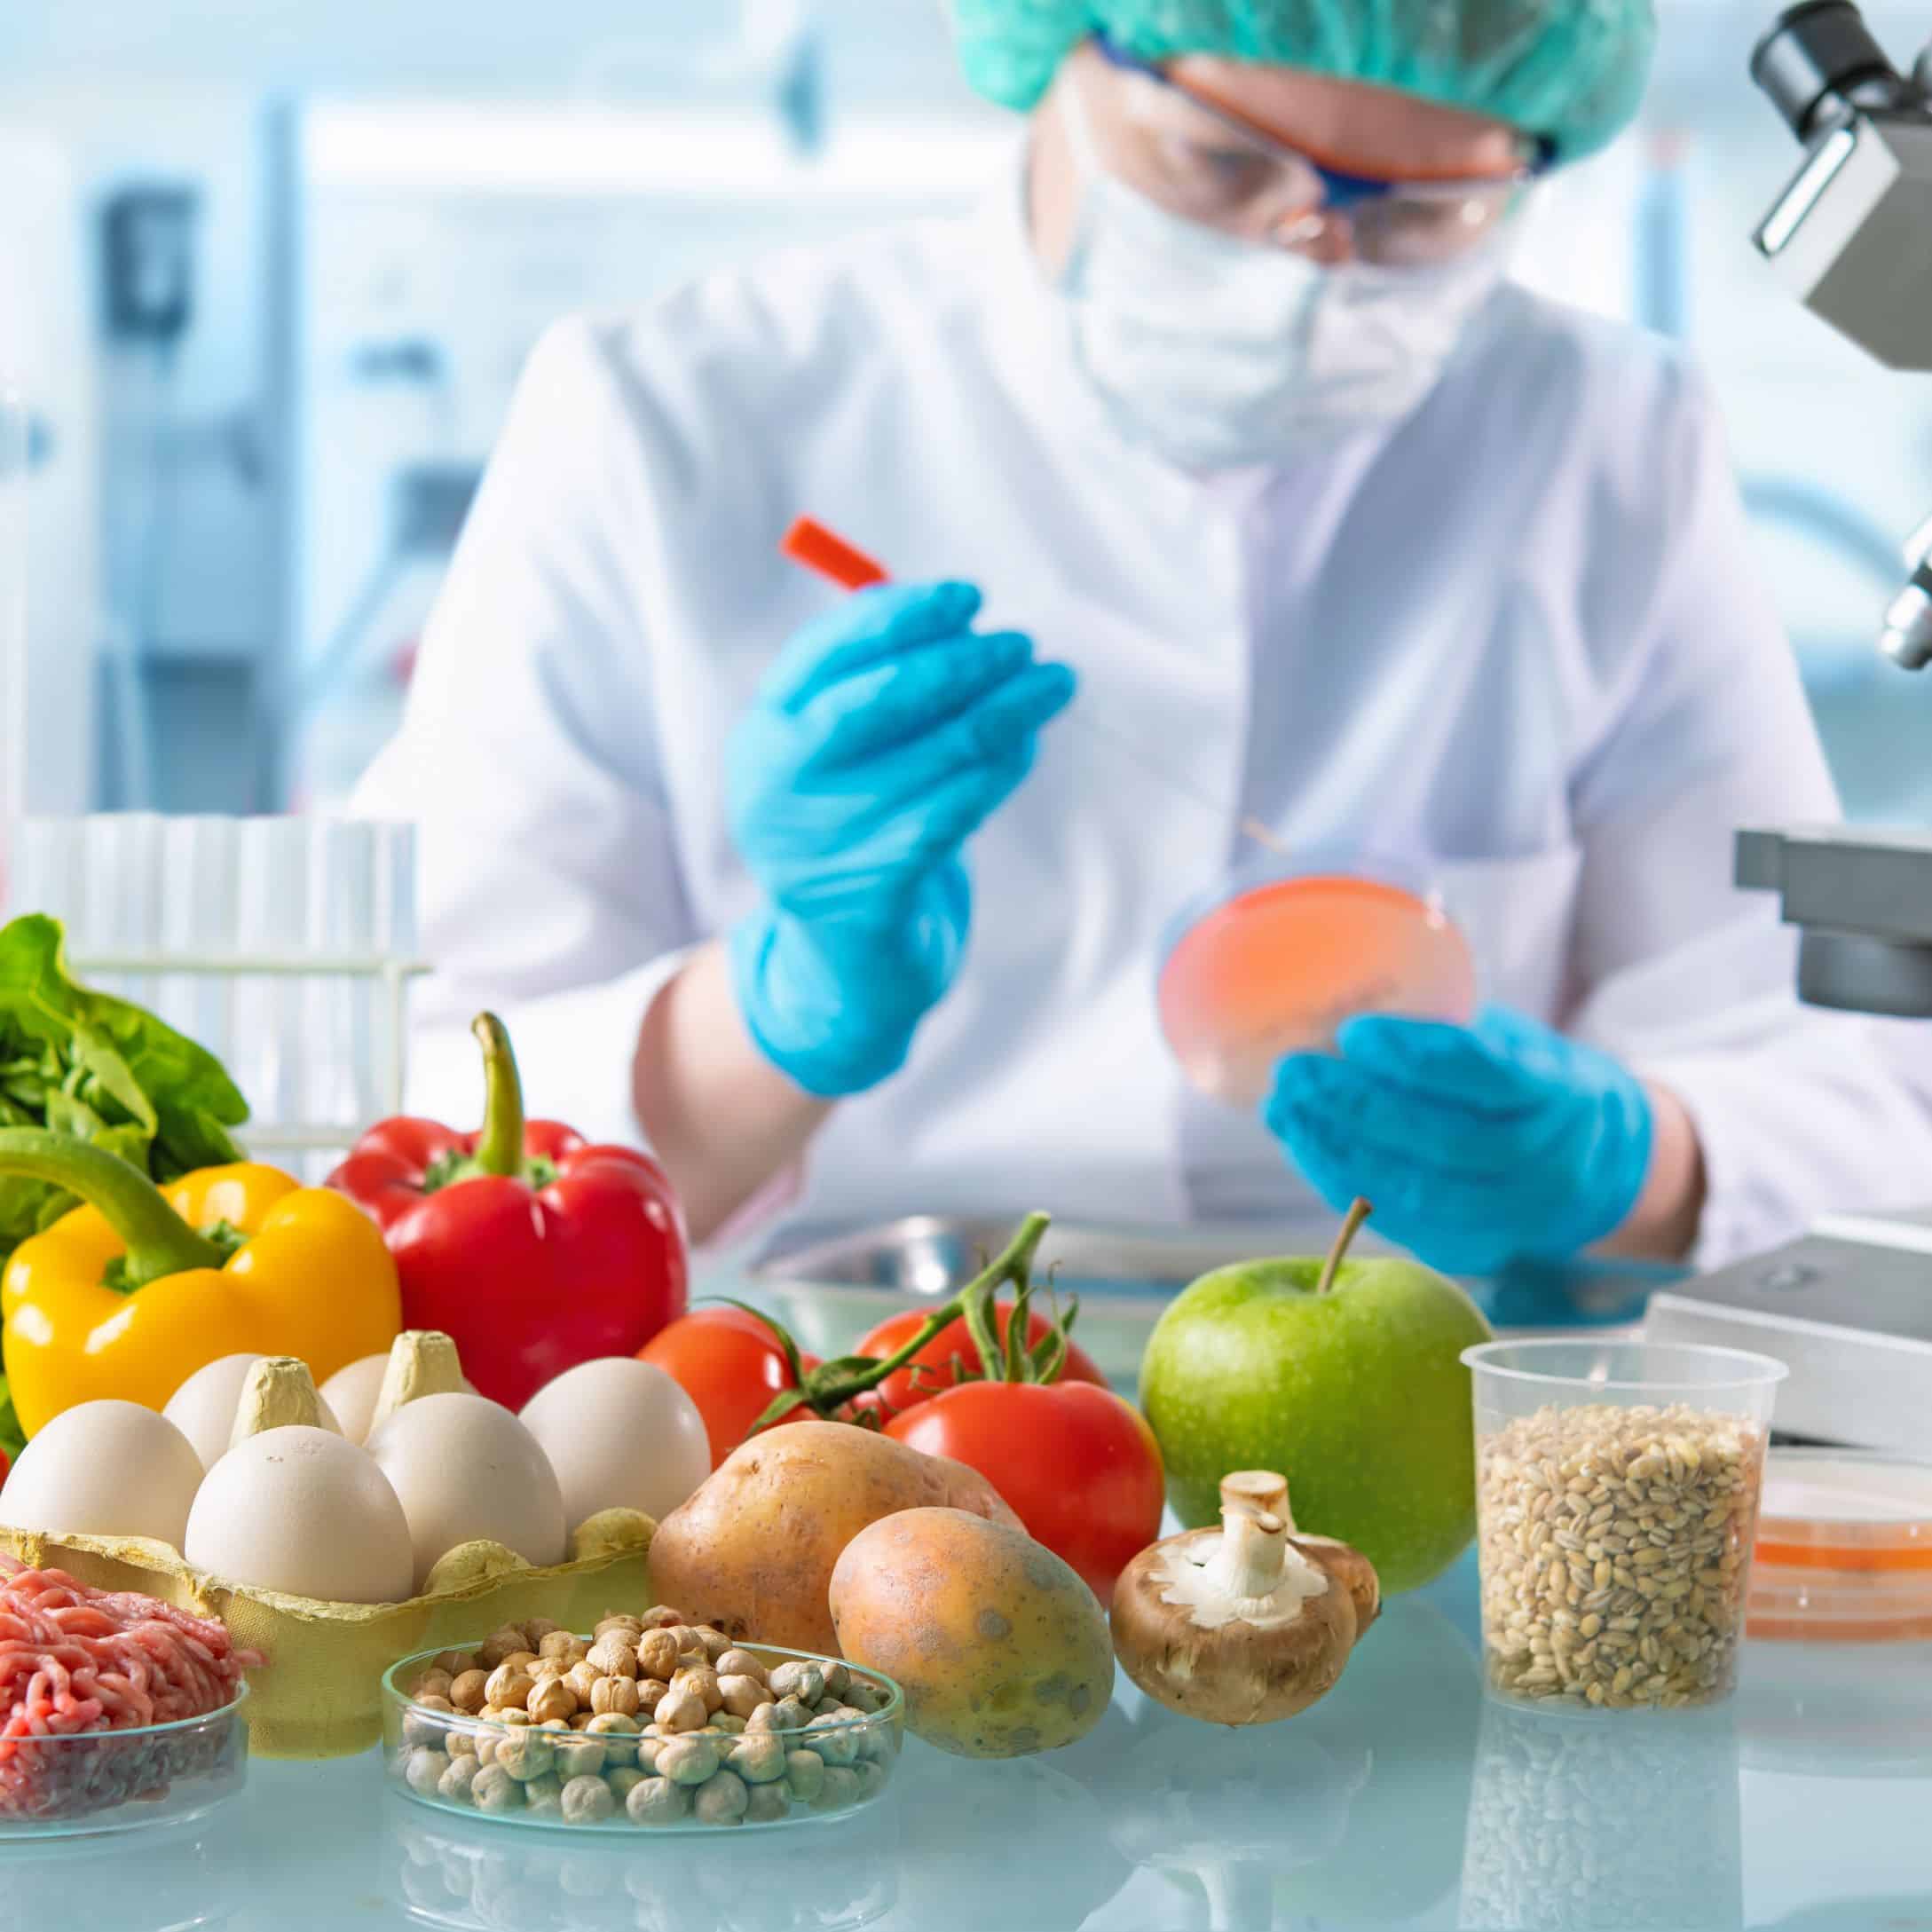 Image-of-Worker-Checking-Food-for-Learn-Q-The-Importance-of-Food-Safety-Training-in-the-UK-blog